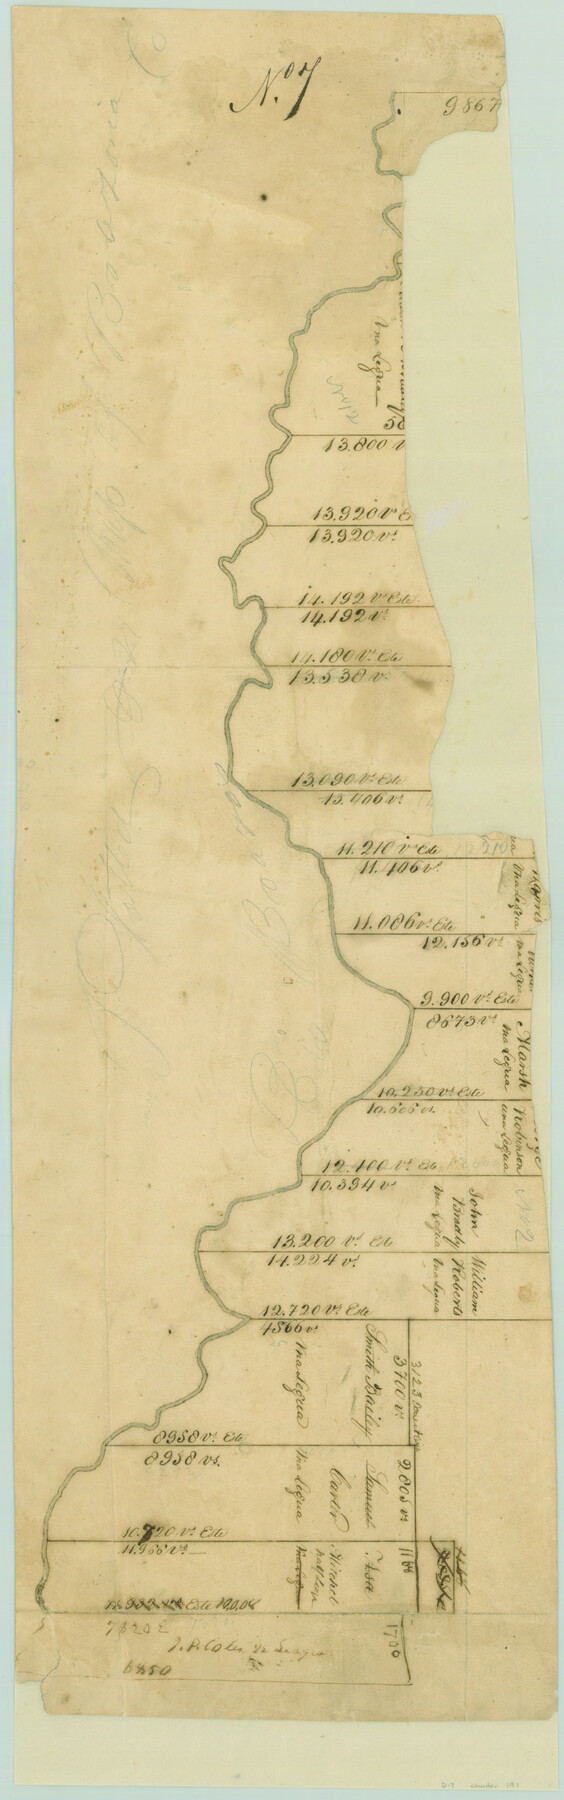 191, [Surveys in Austin's Colony along the east side of the Brazos River], General Map Collection